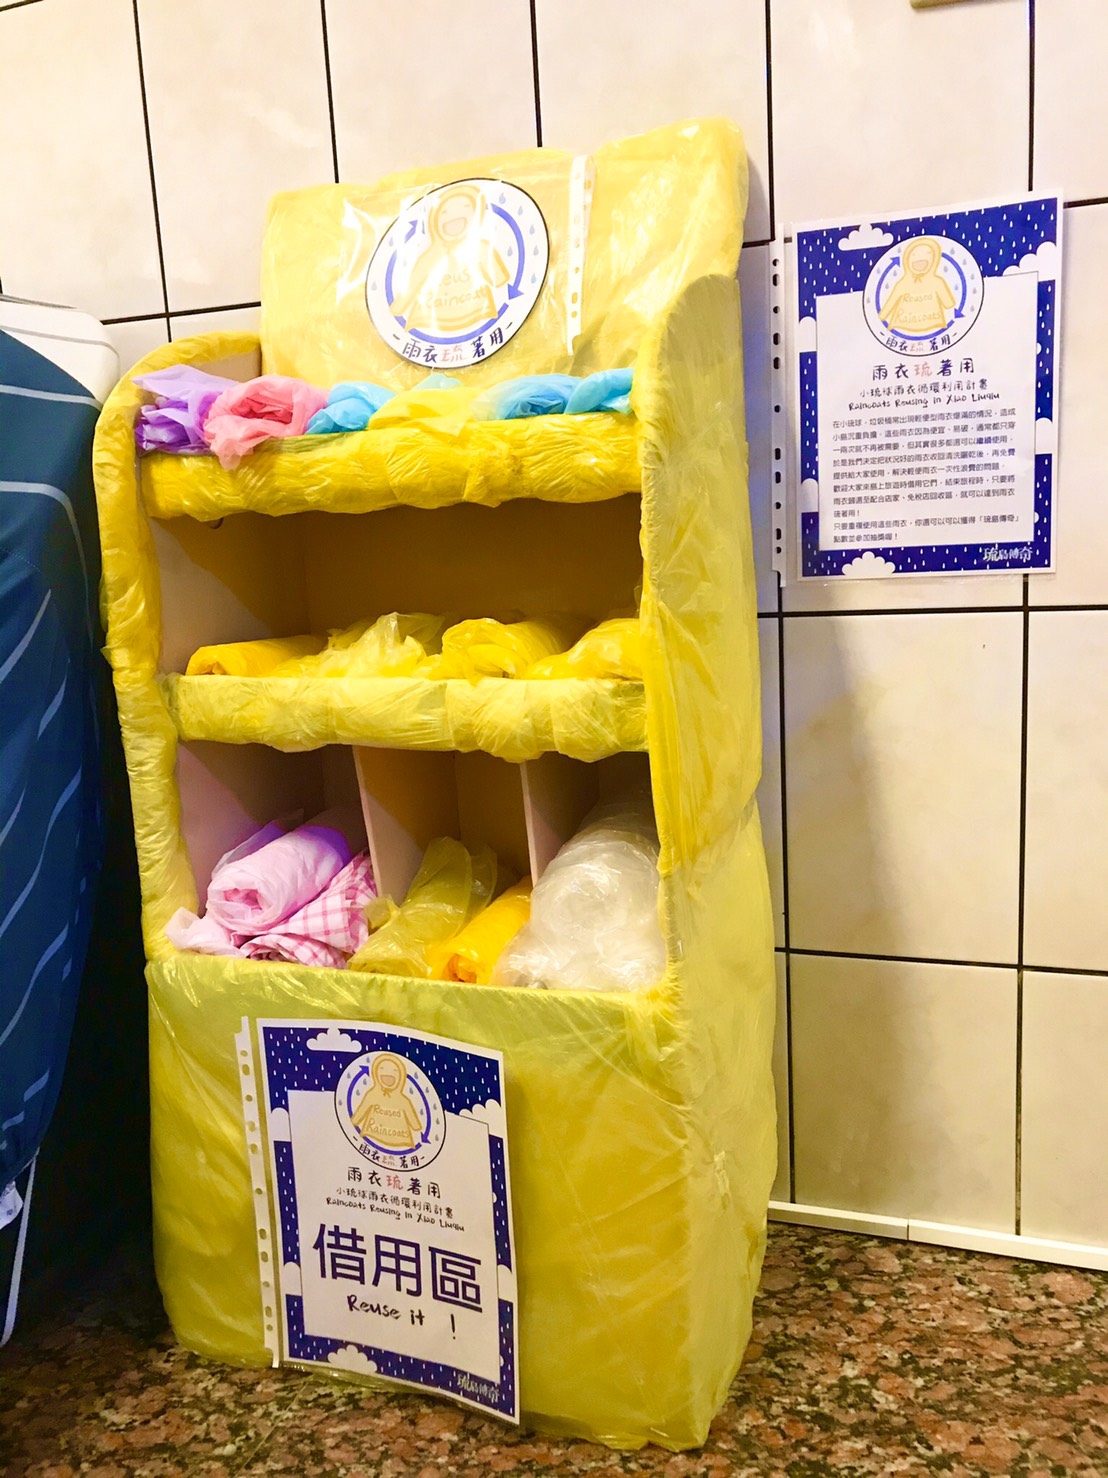 The “Reusable Raincoats in Liuqiu” racks are adapted from idled racks for displaying goods at convenience stores. Since these are paper racks, the organizer wrapped them up with a disposable raincoat, so that they won’t be damaged on rainy days.  (Photo credit: Chen Hung-chun)